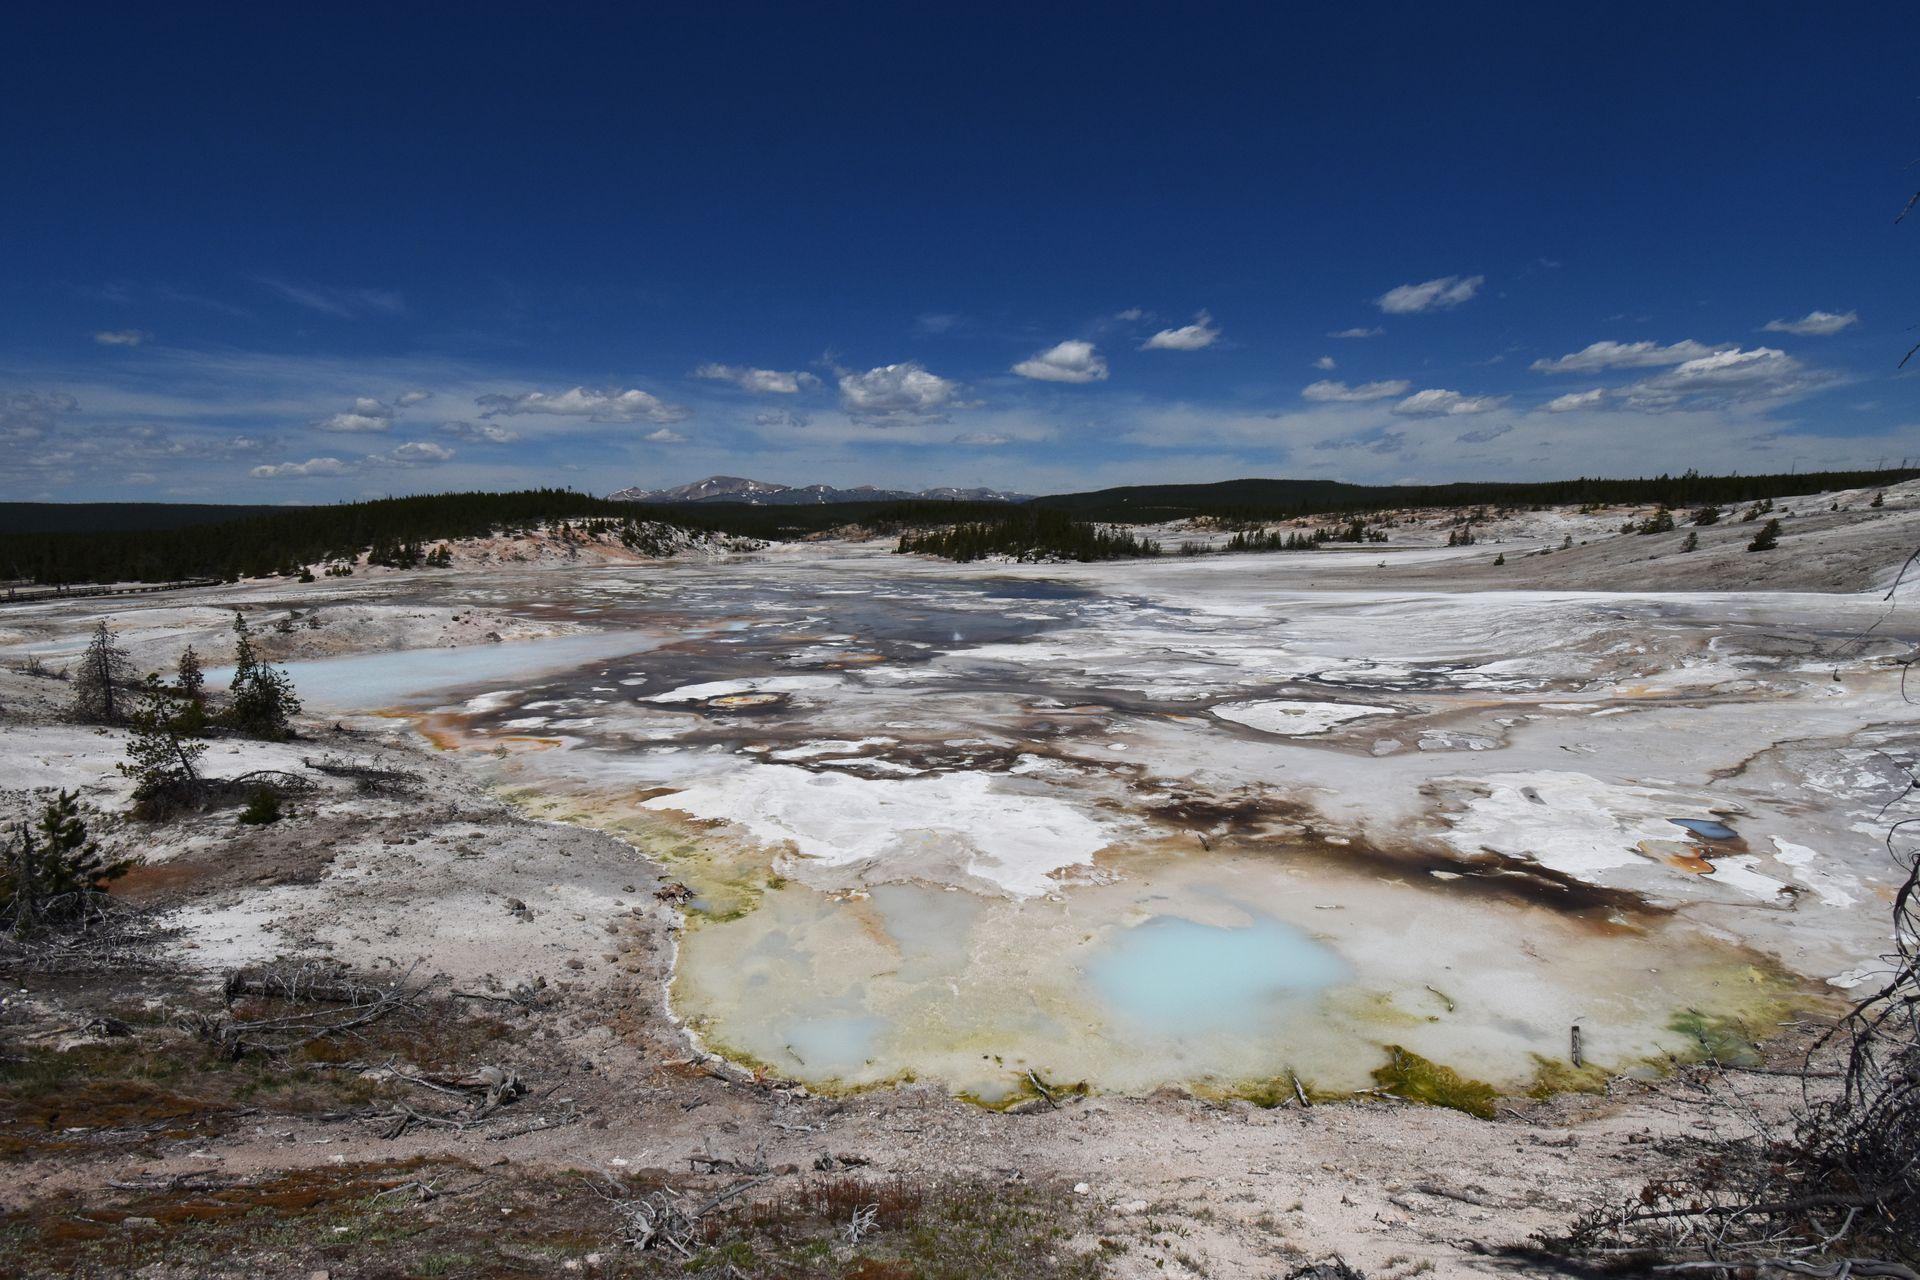 A bright blue hot spring in the Porcelain Basin area of Yellowstone.